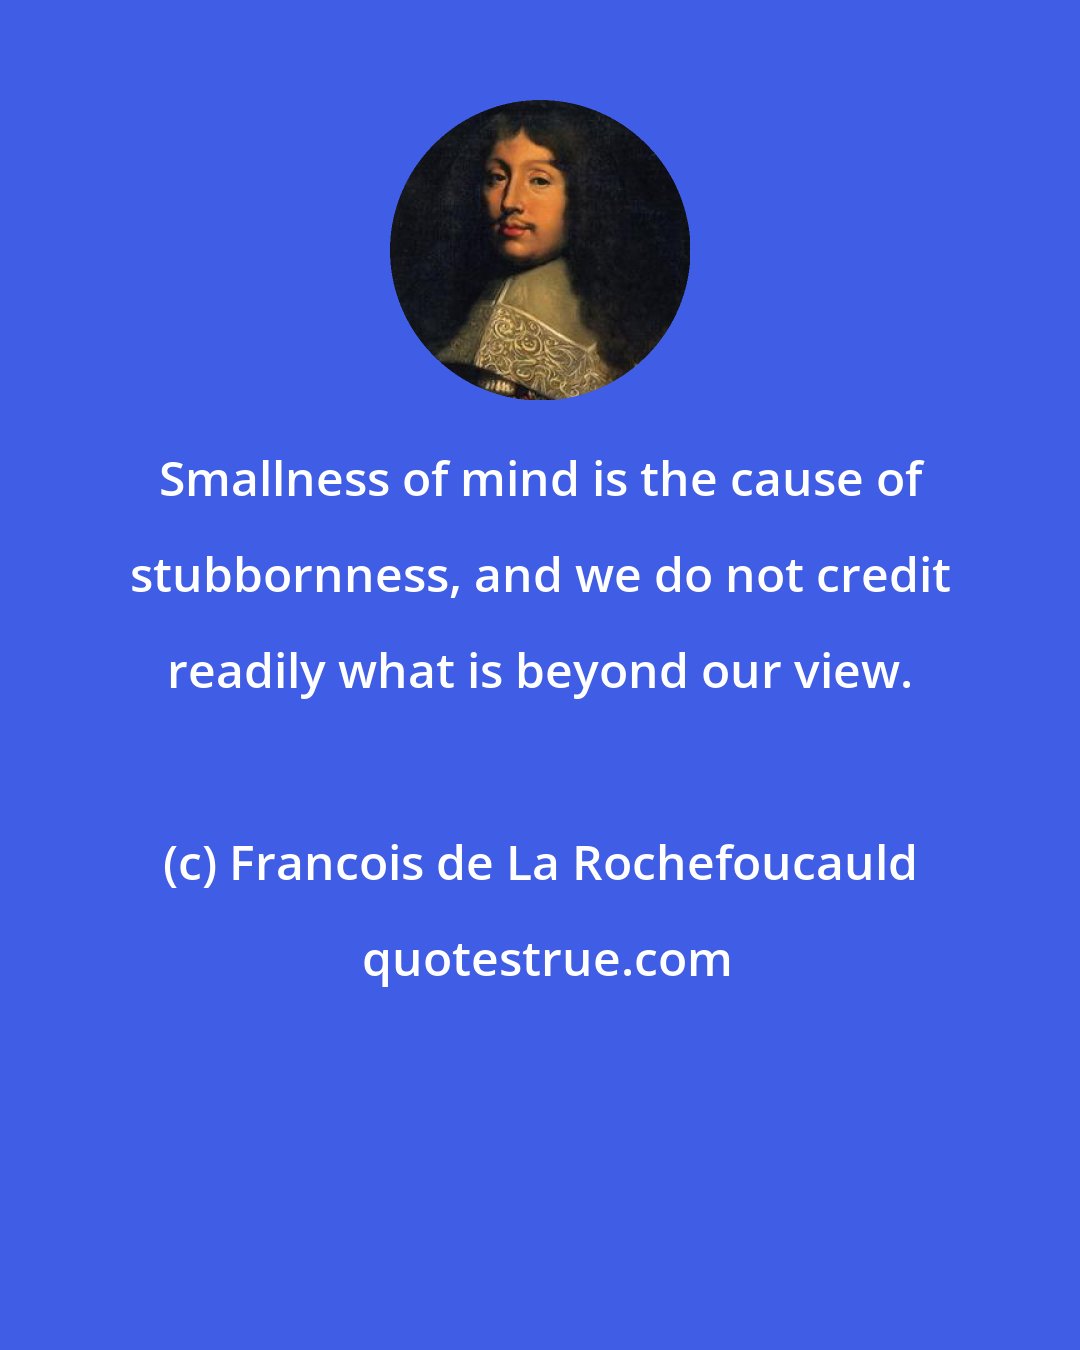 Francois de La Rochefoucauld: Smallness of mind is the cause of stubbornness, and we do not credit readily what is beyond our view.